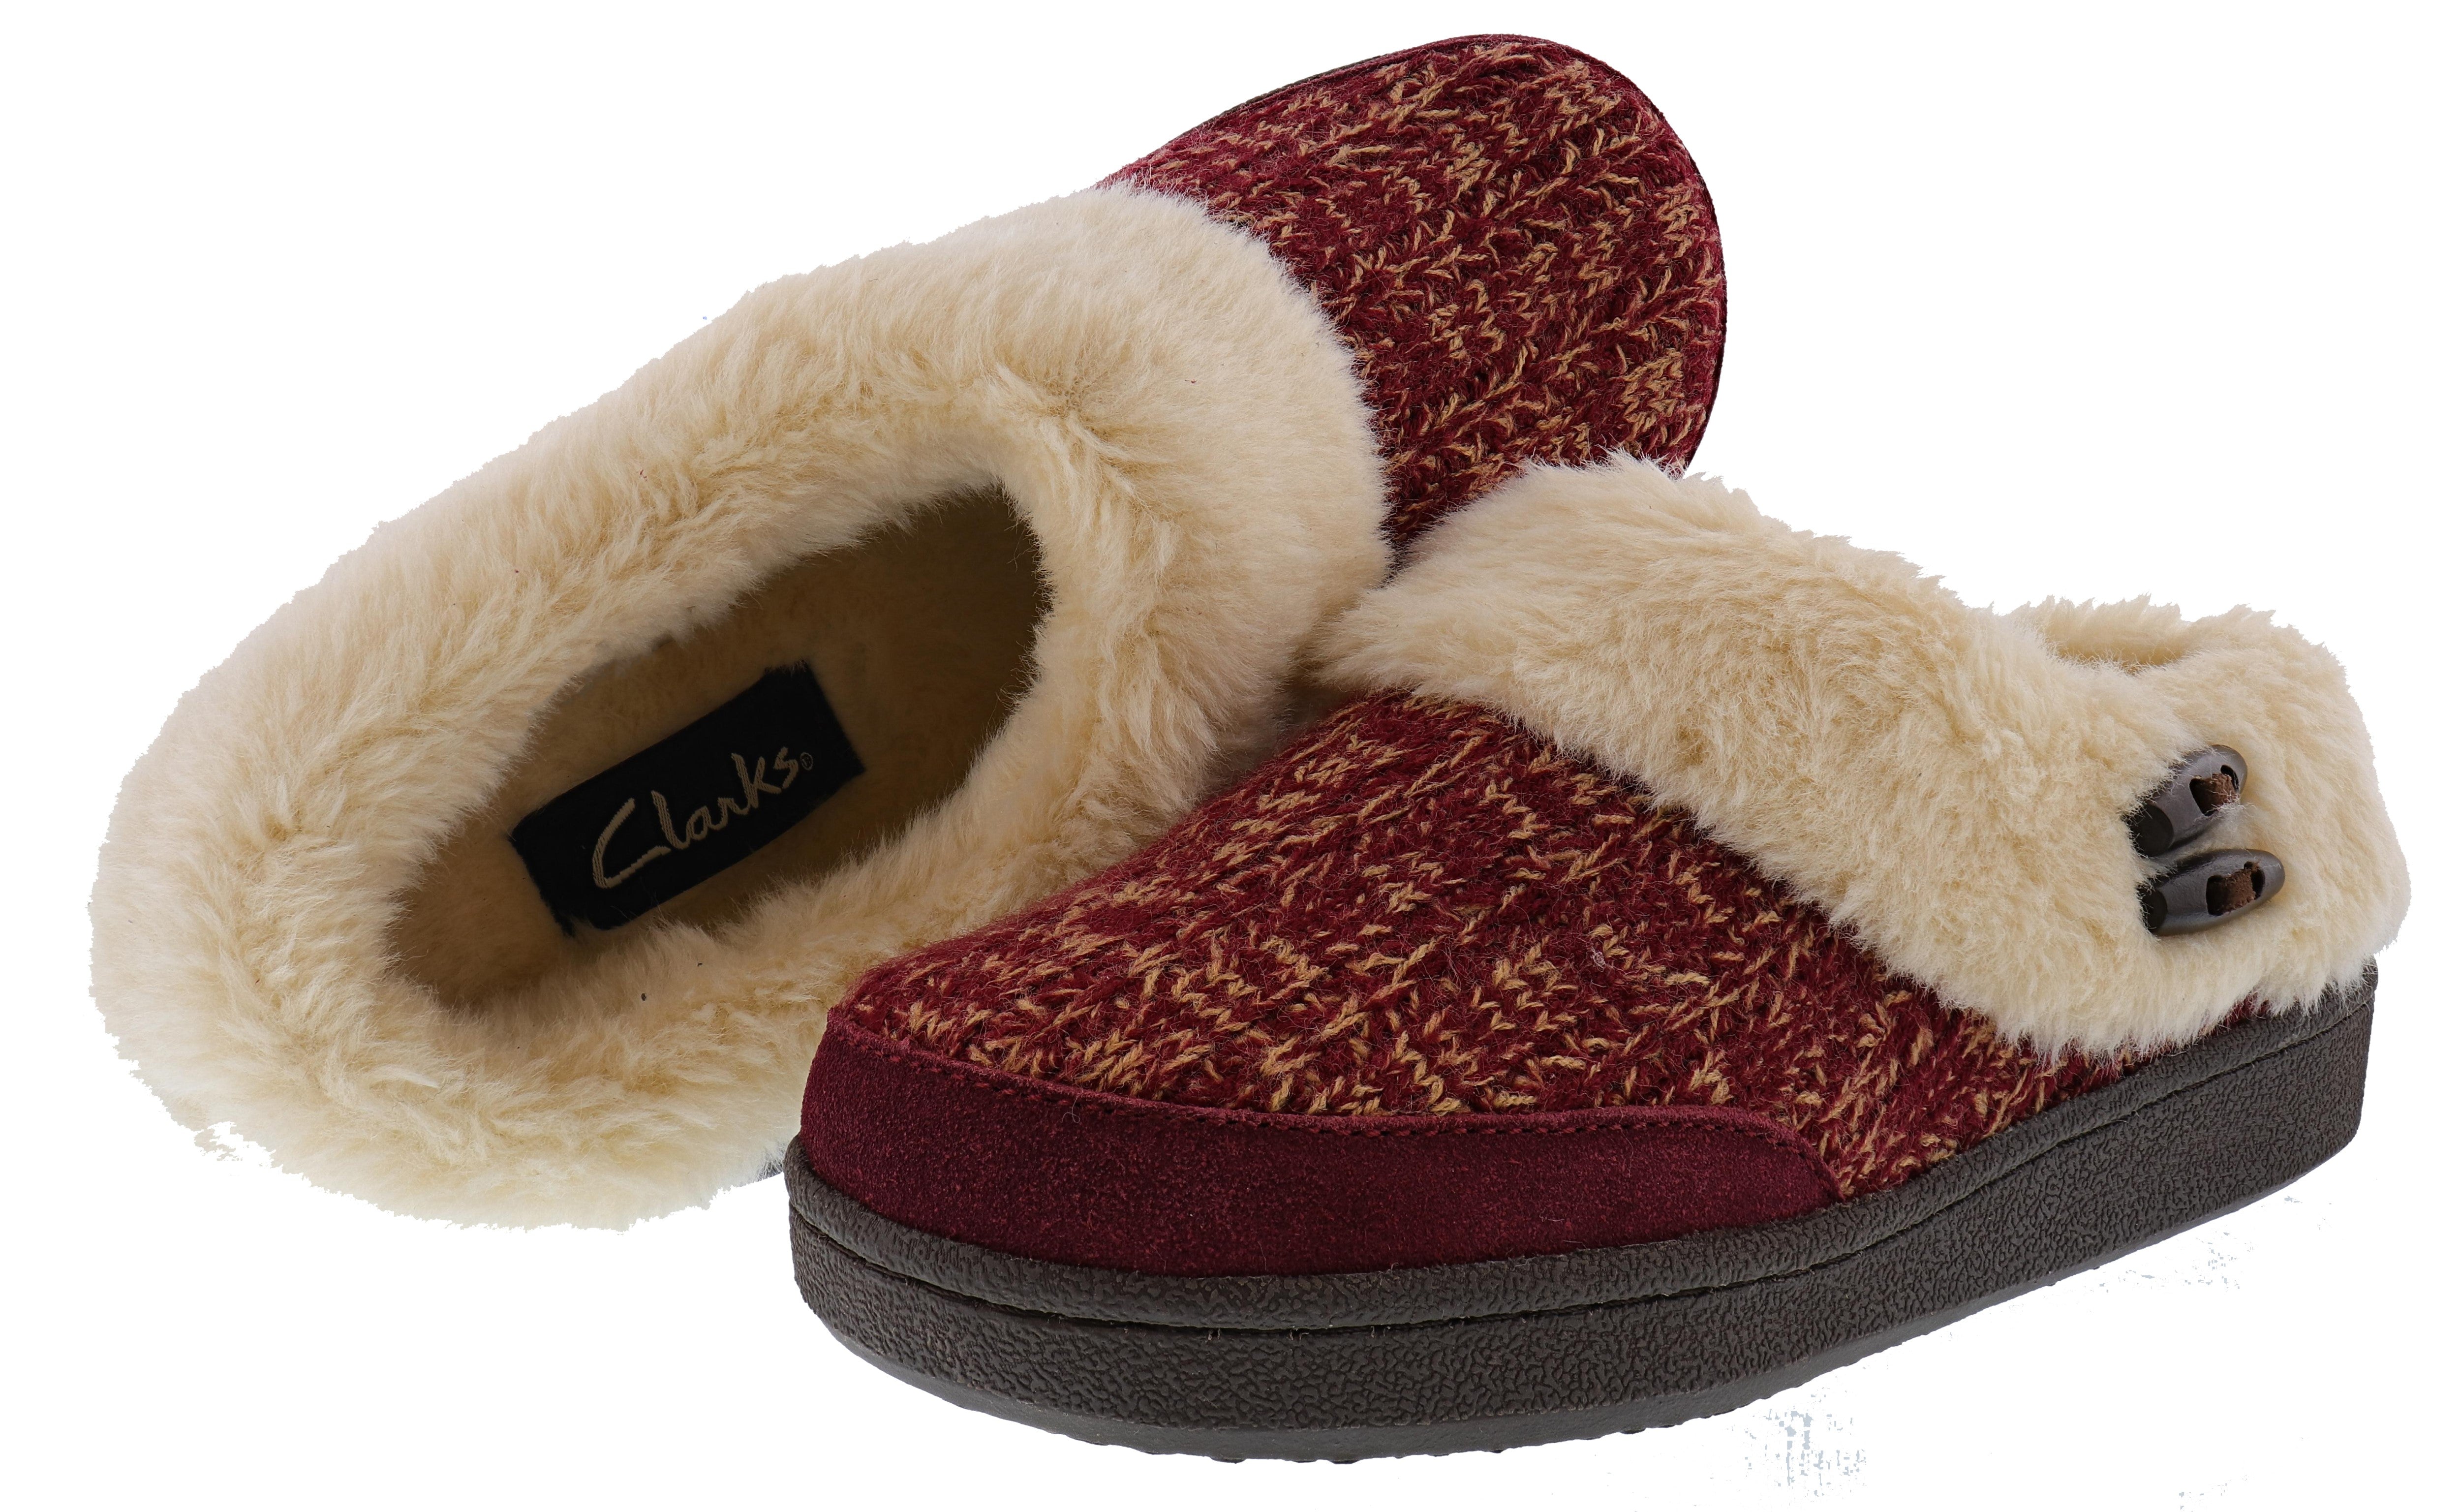 Clarks Women's Suede Bowknot Moccasin Indoor/Outdoor Slippers with Faux Fur  Lining (10 M US, Black) - Walmart.com